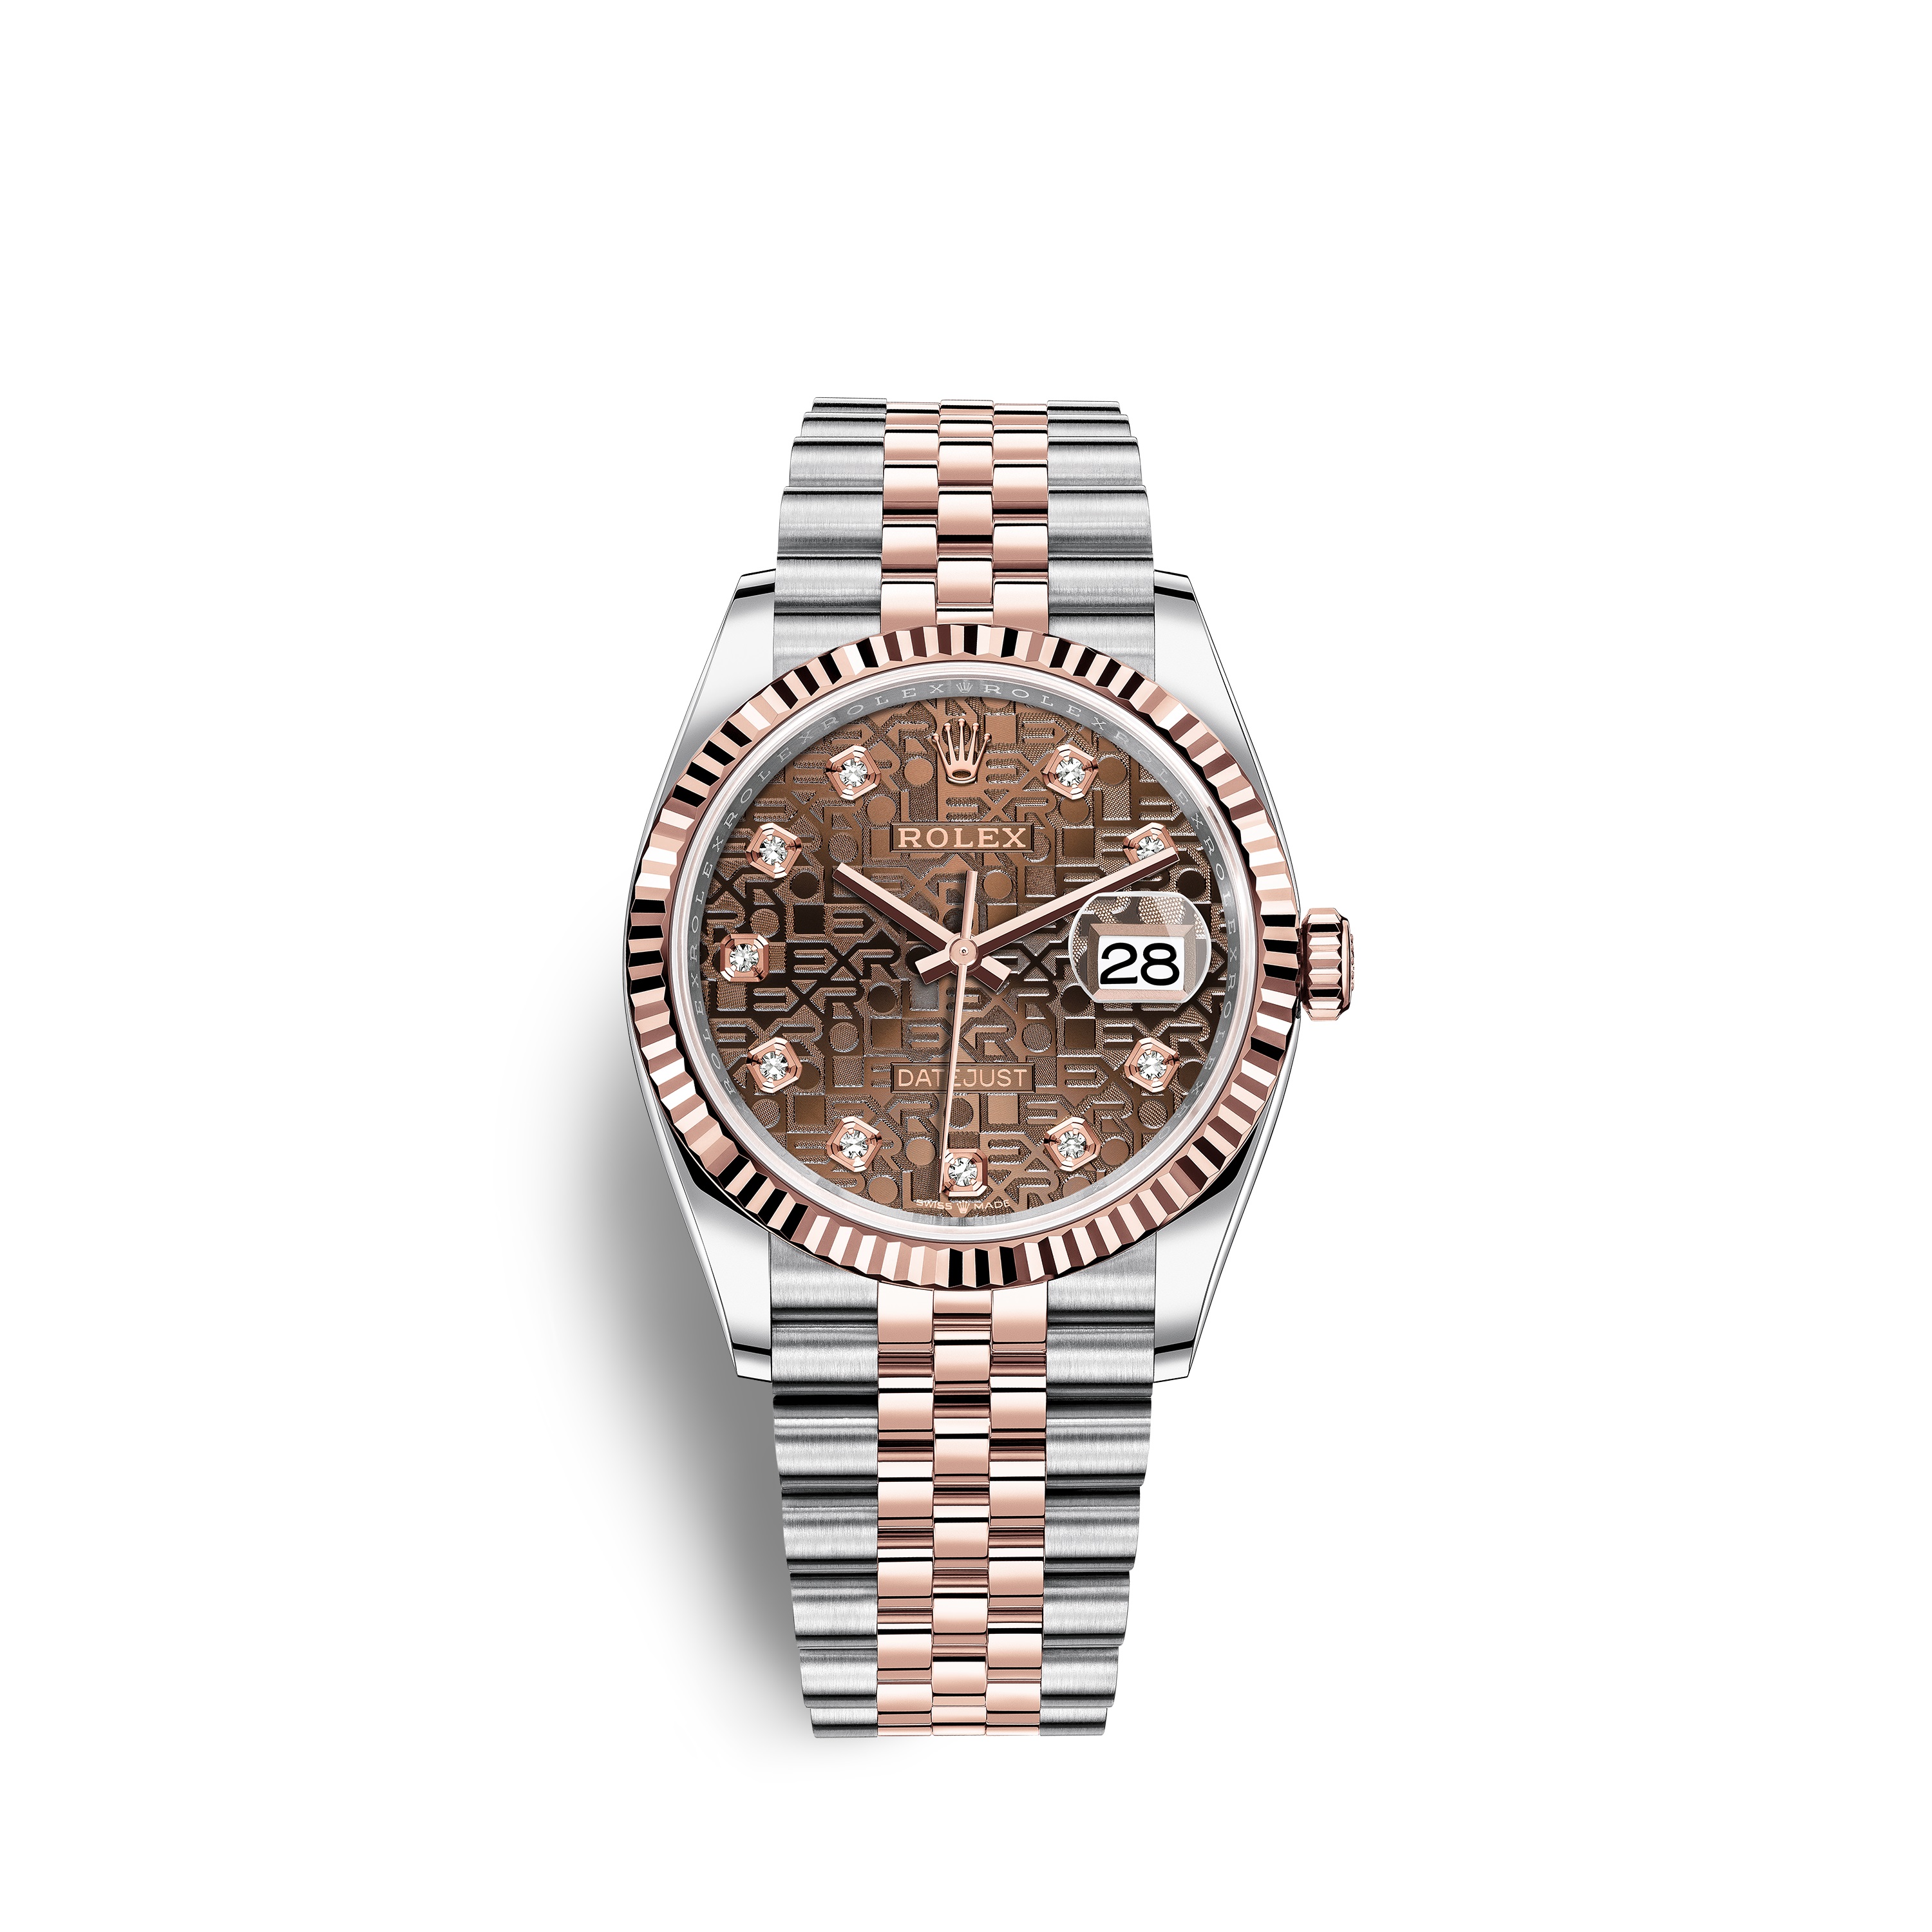 Datejust 36 126231 Rose Gold & Stainless Steel Watch (Chocolate Jubilee Design Set with Diamonds) - Click Image to Close